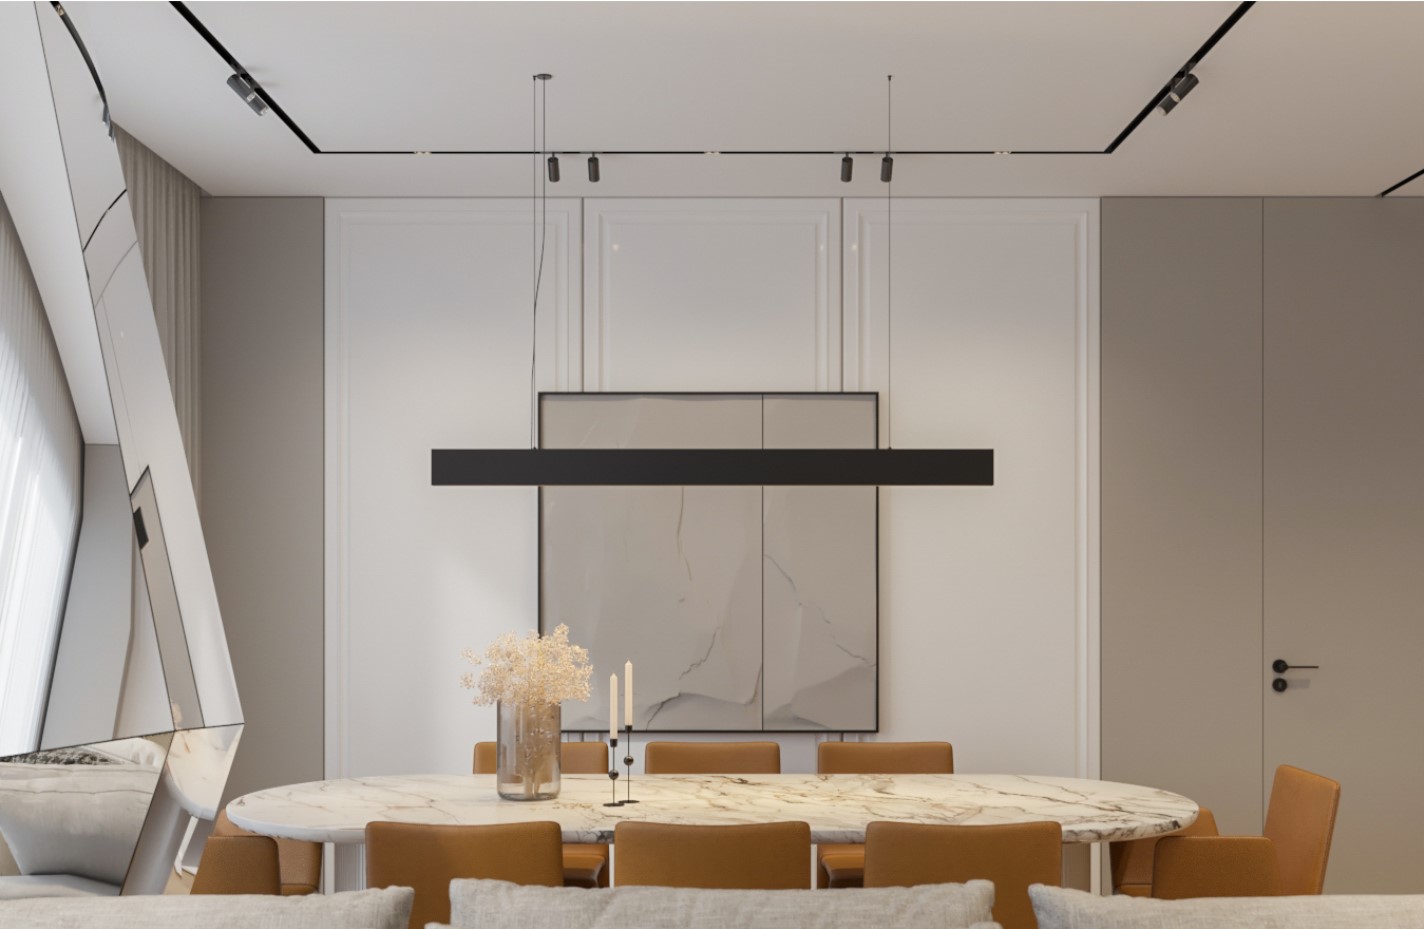 Contemporary dining room with a minimalist design, featuring a marble table, tan chairs, and sleek overhead lighting, showcasing the essence of modern Home Renovation.